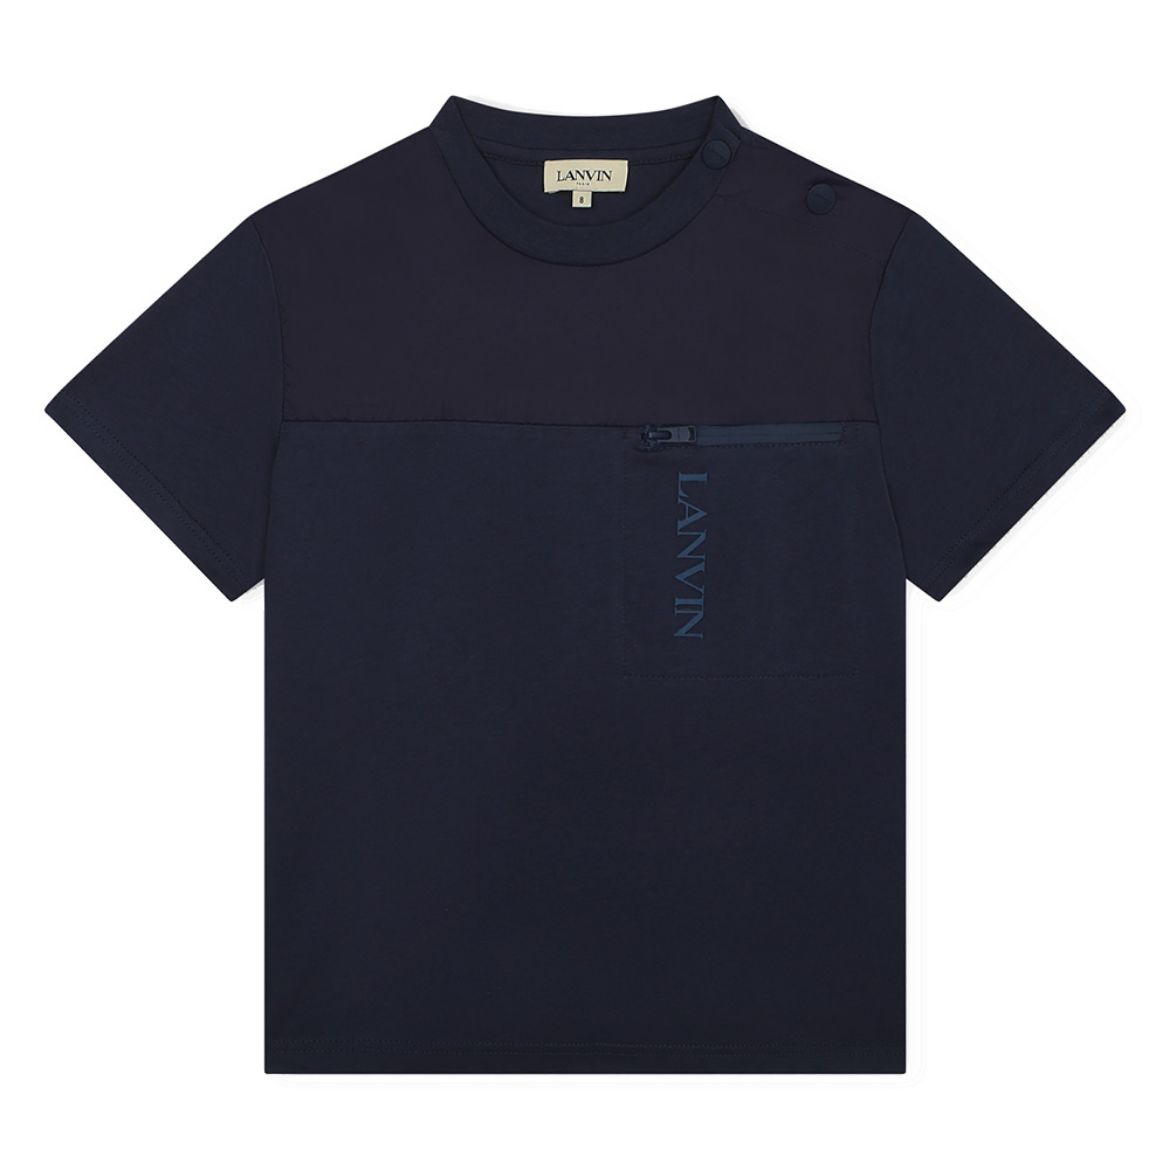 Picture of Lanvin Boys Navy T-shirt